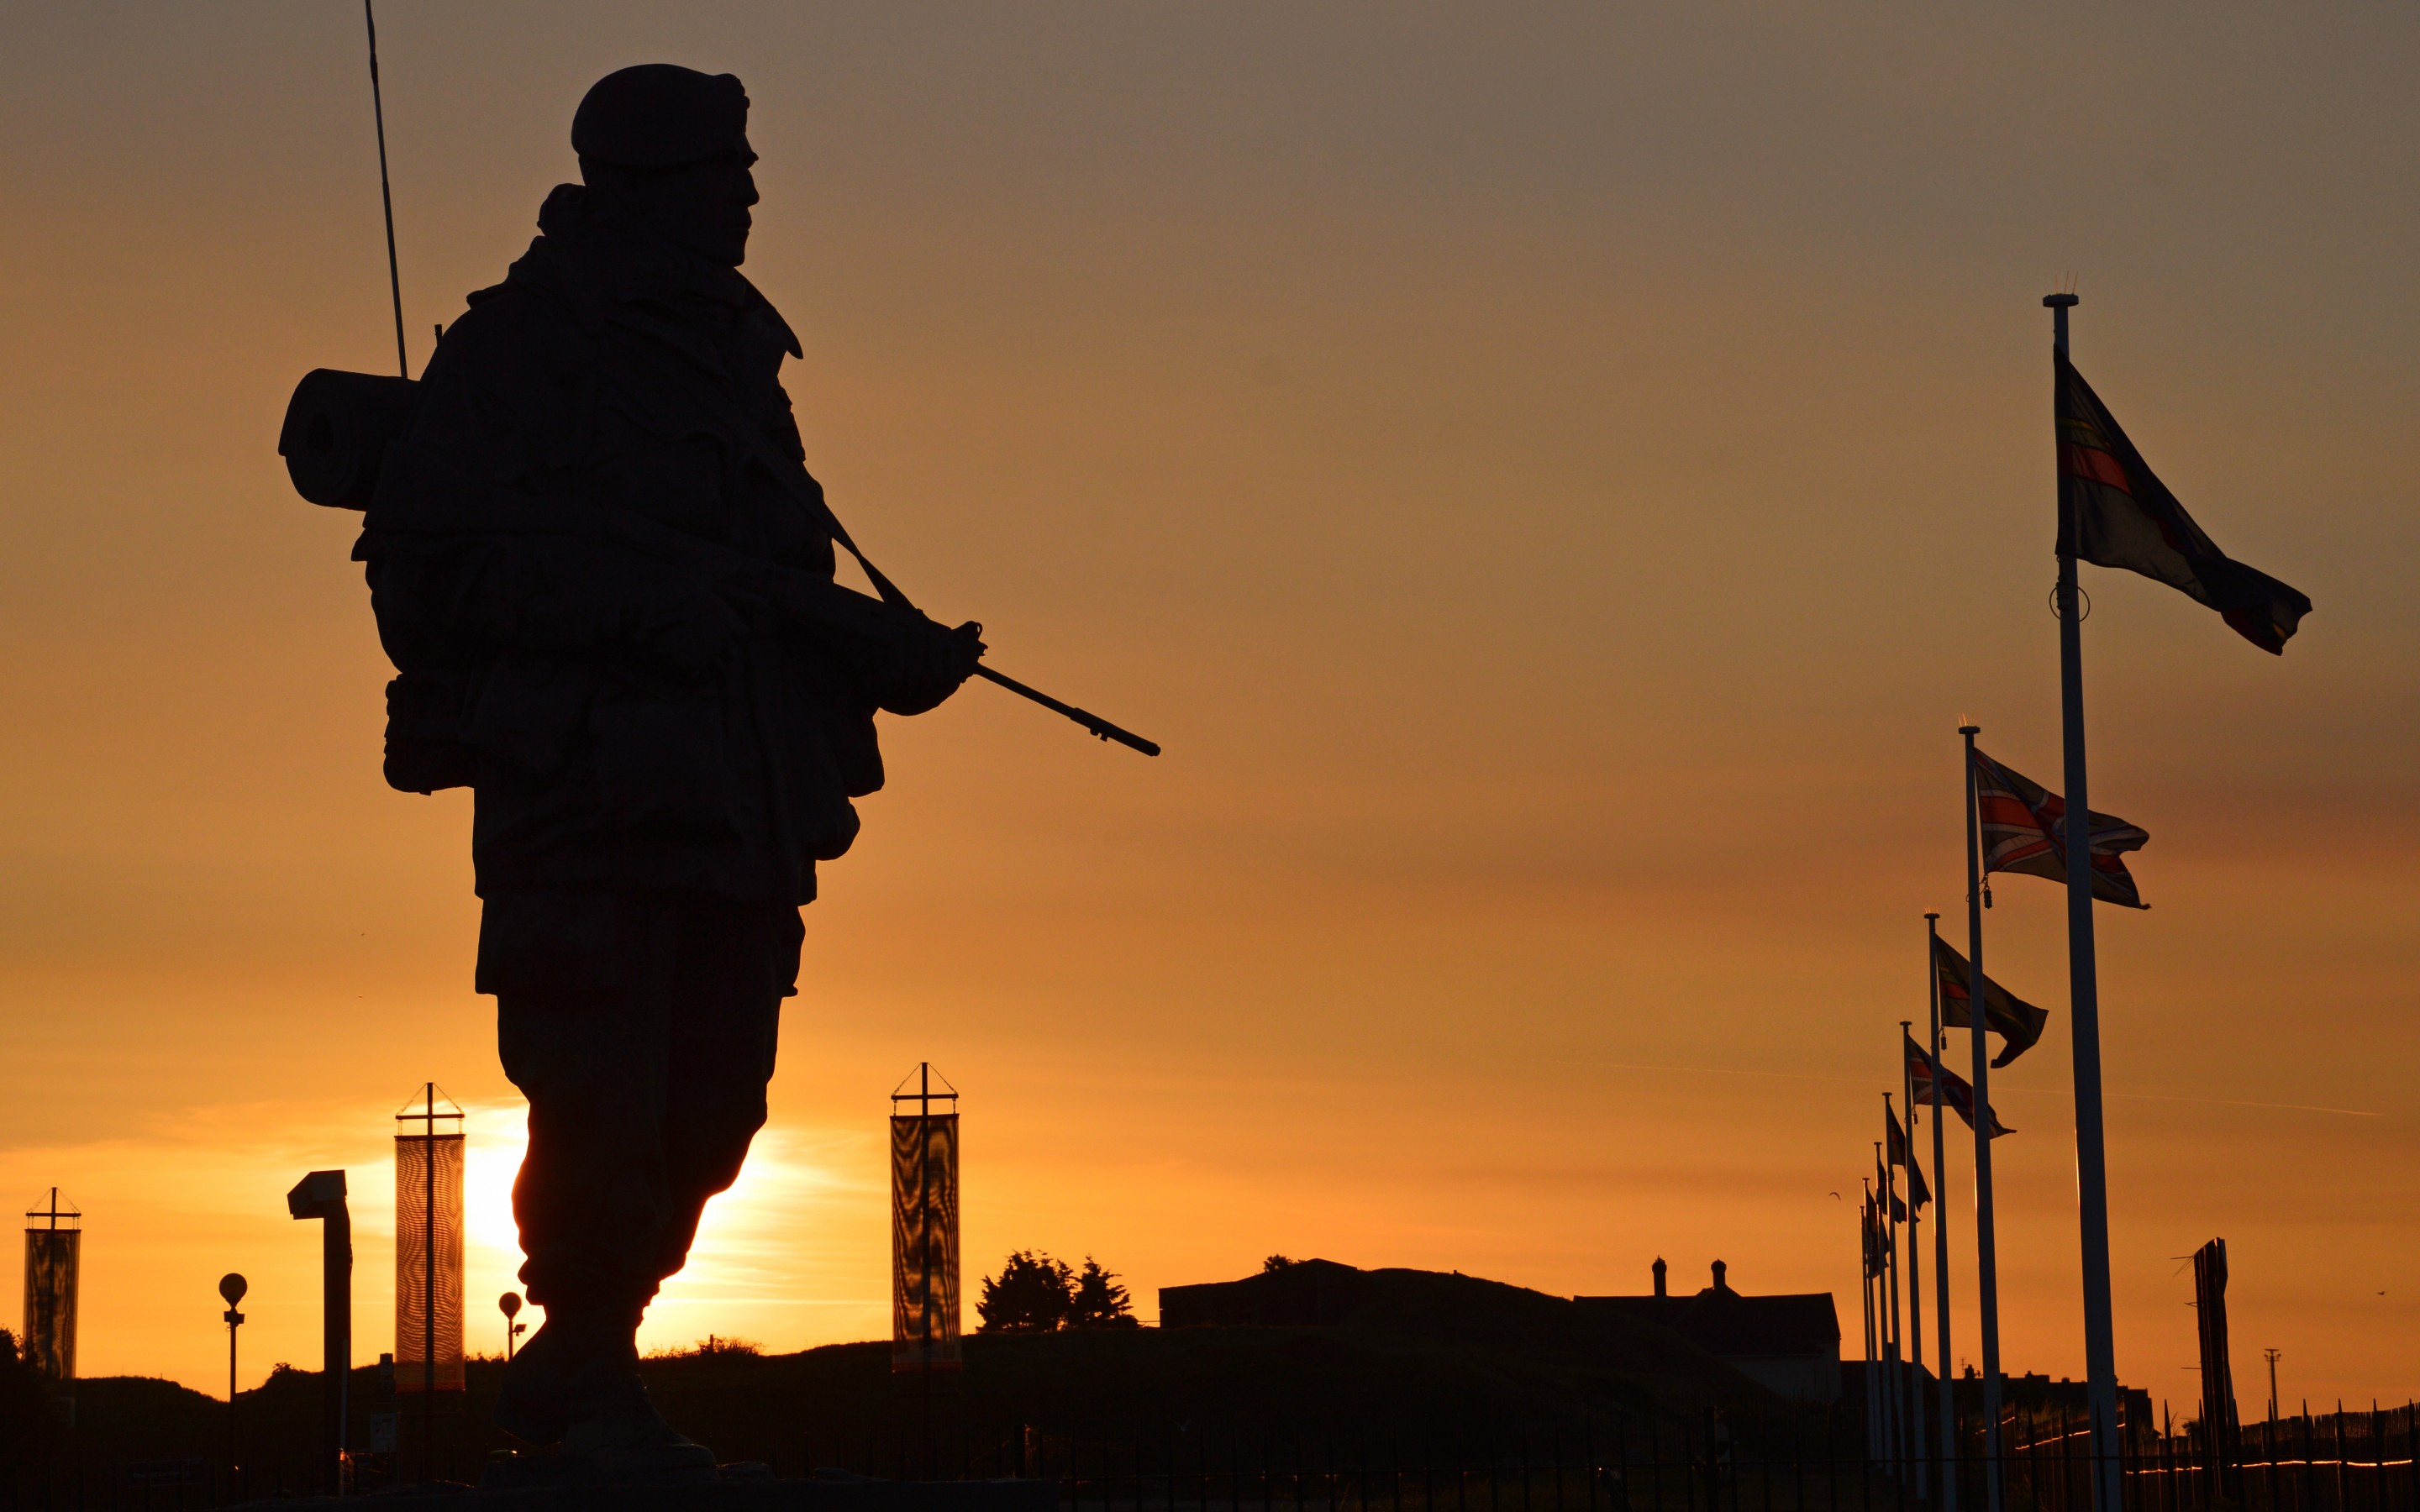 sun, Sunset, Silhouette, Commandos, Soldiers, Weapons, Equipment, Royal, Marines, Uk, Military Wallpaper